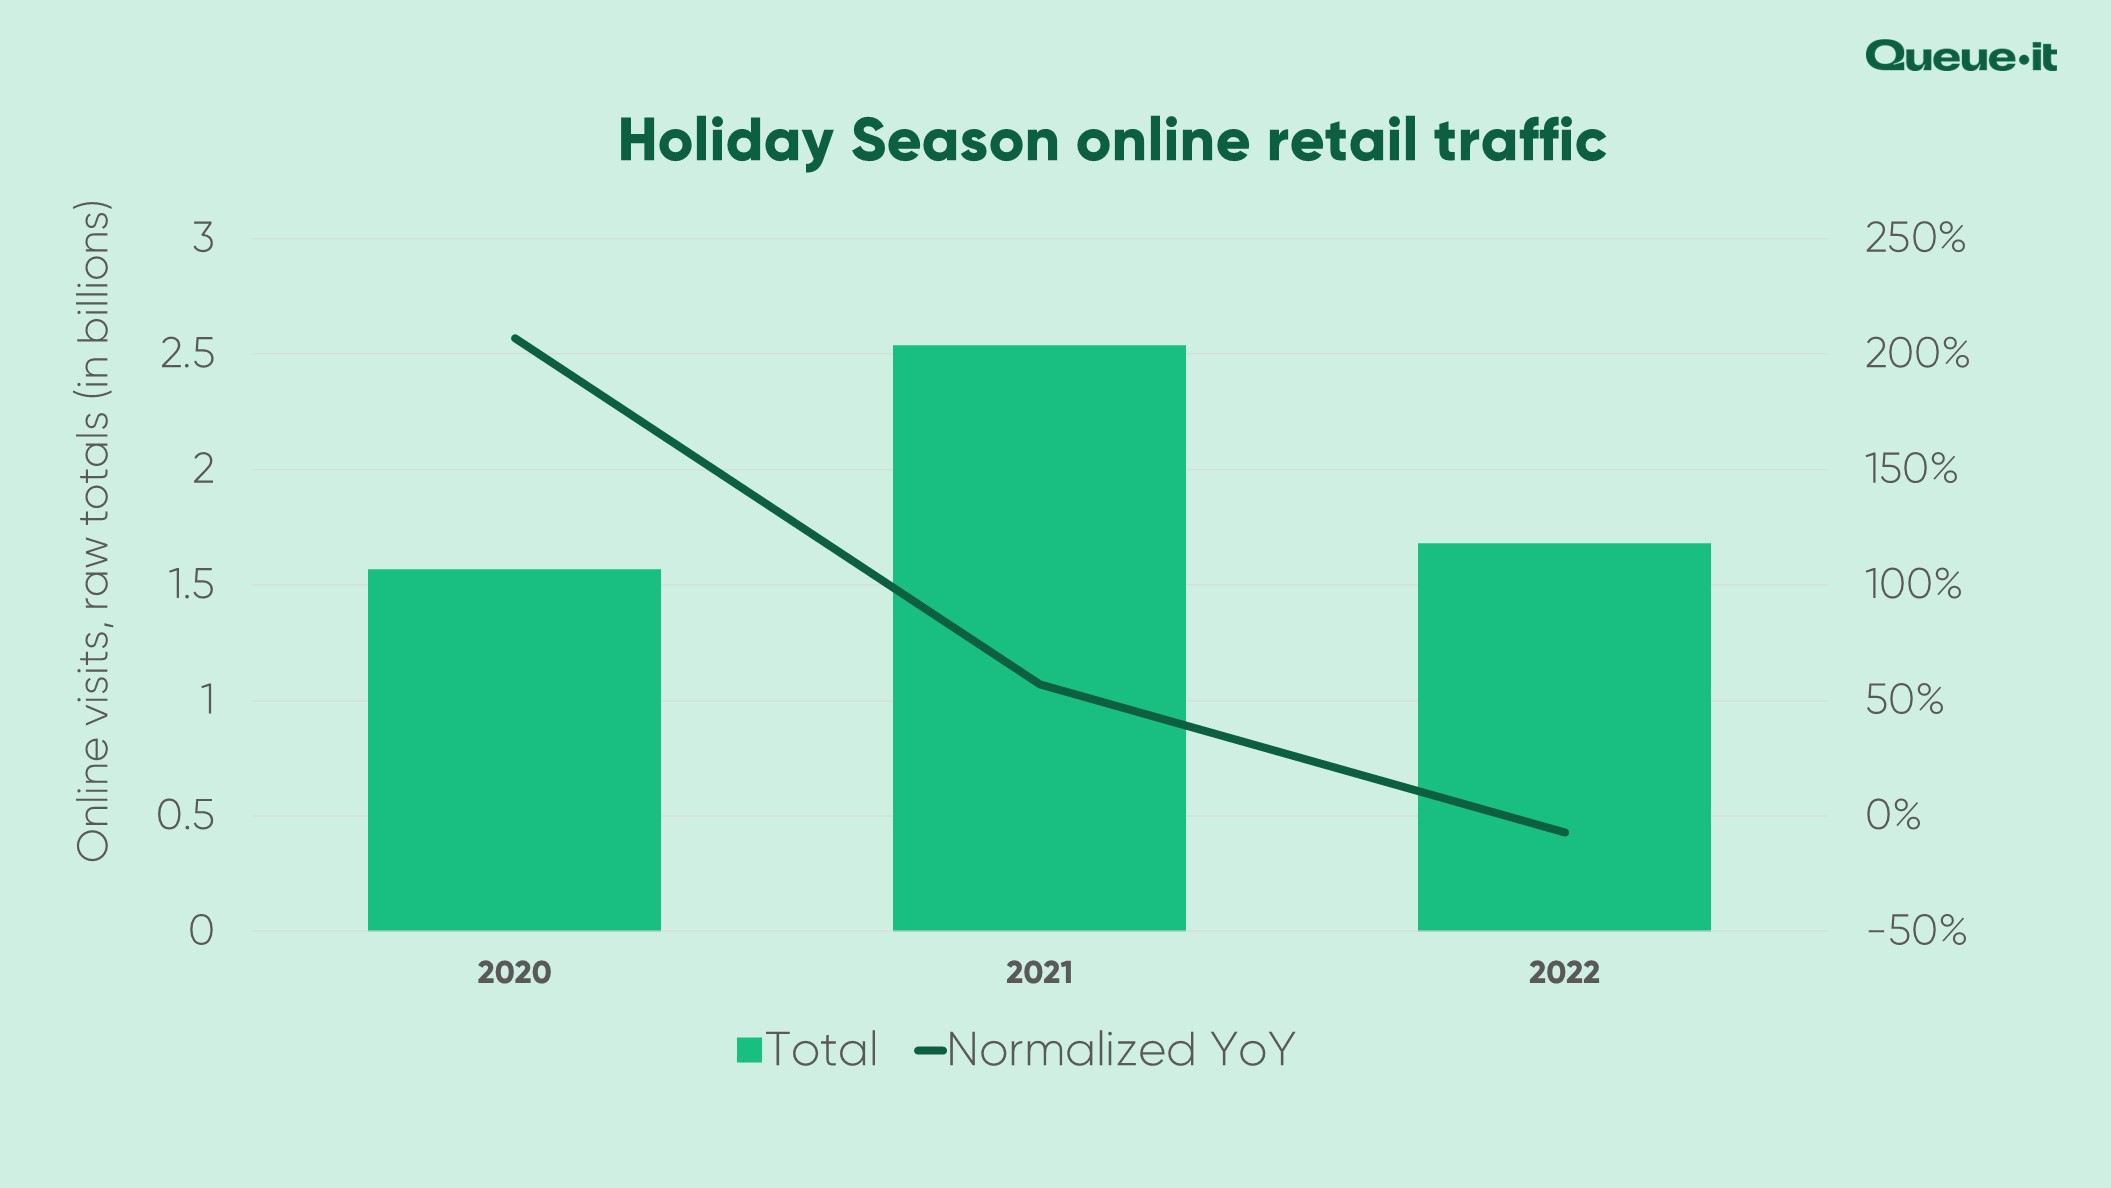 Holiday season retail online traffic with year over year change 2022 v 2021